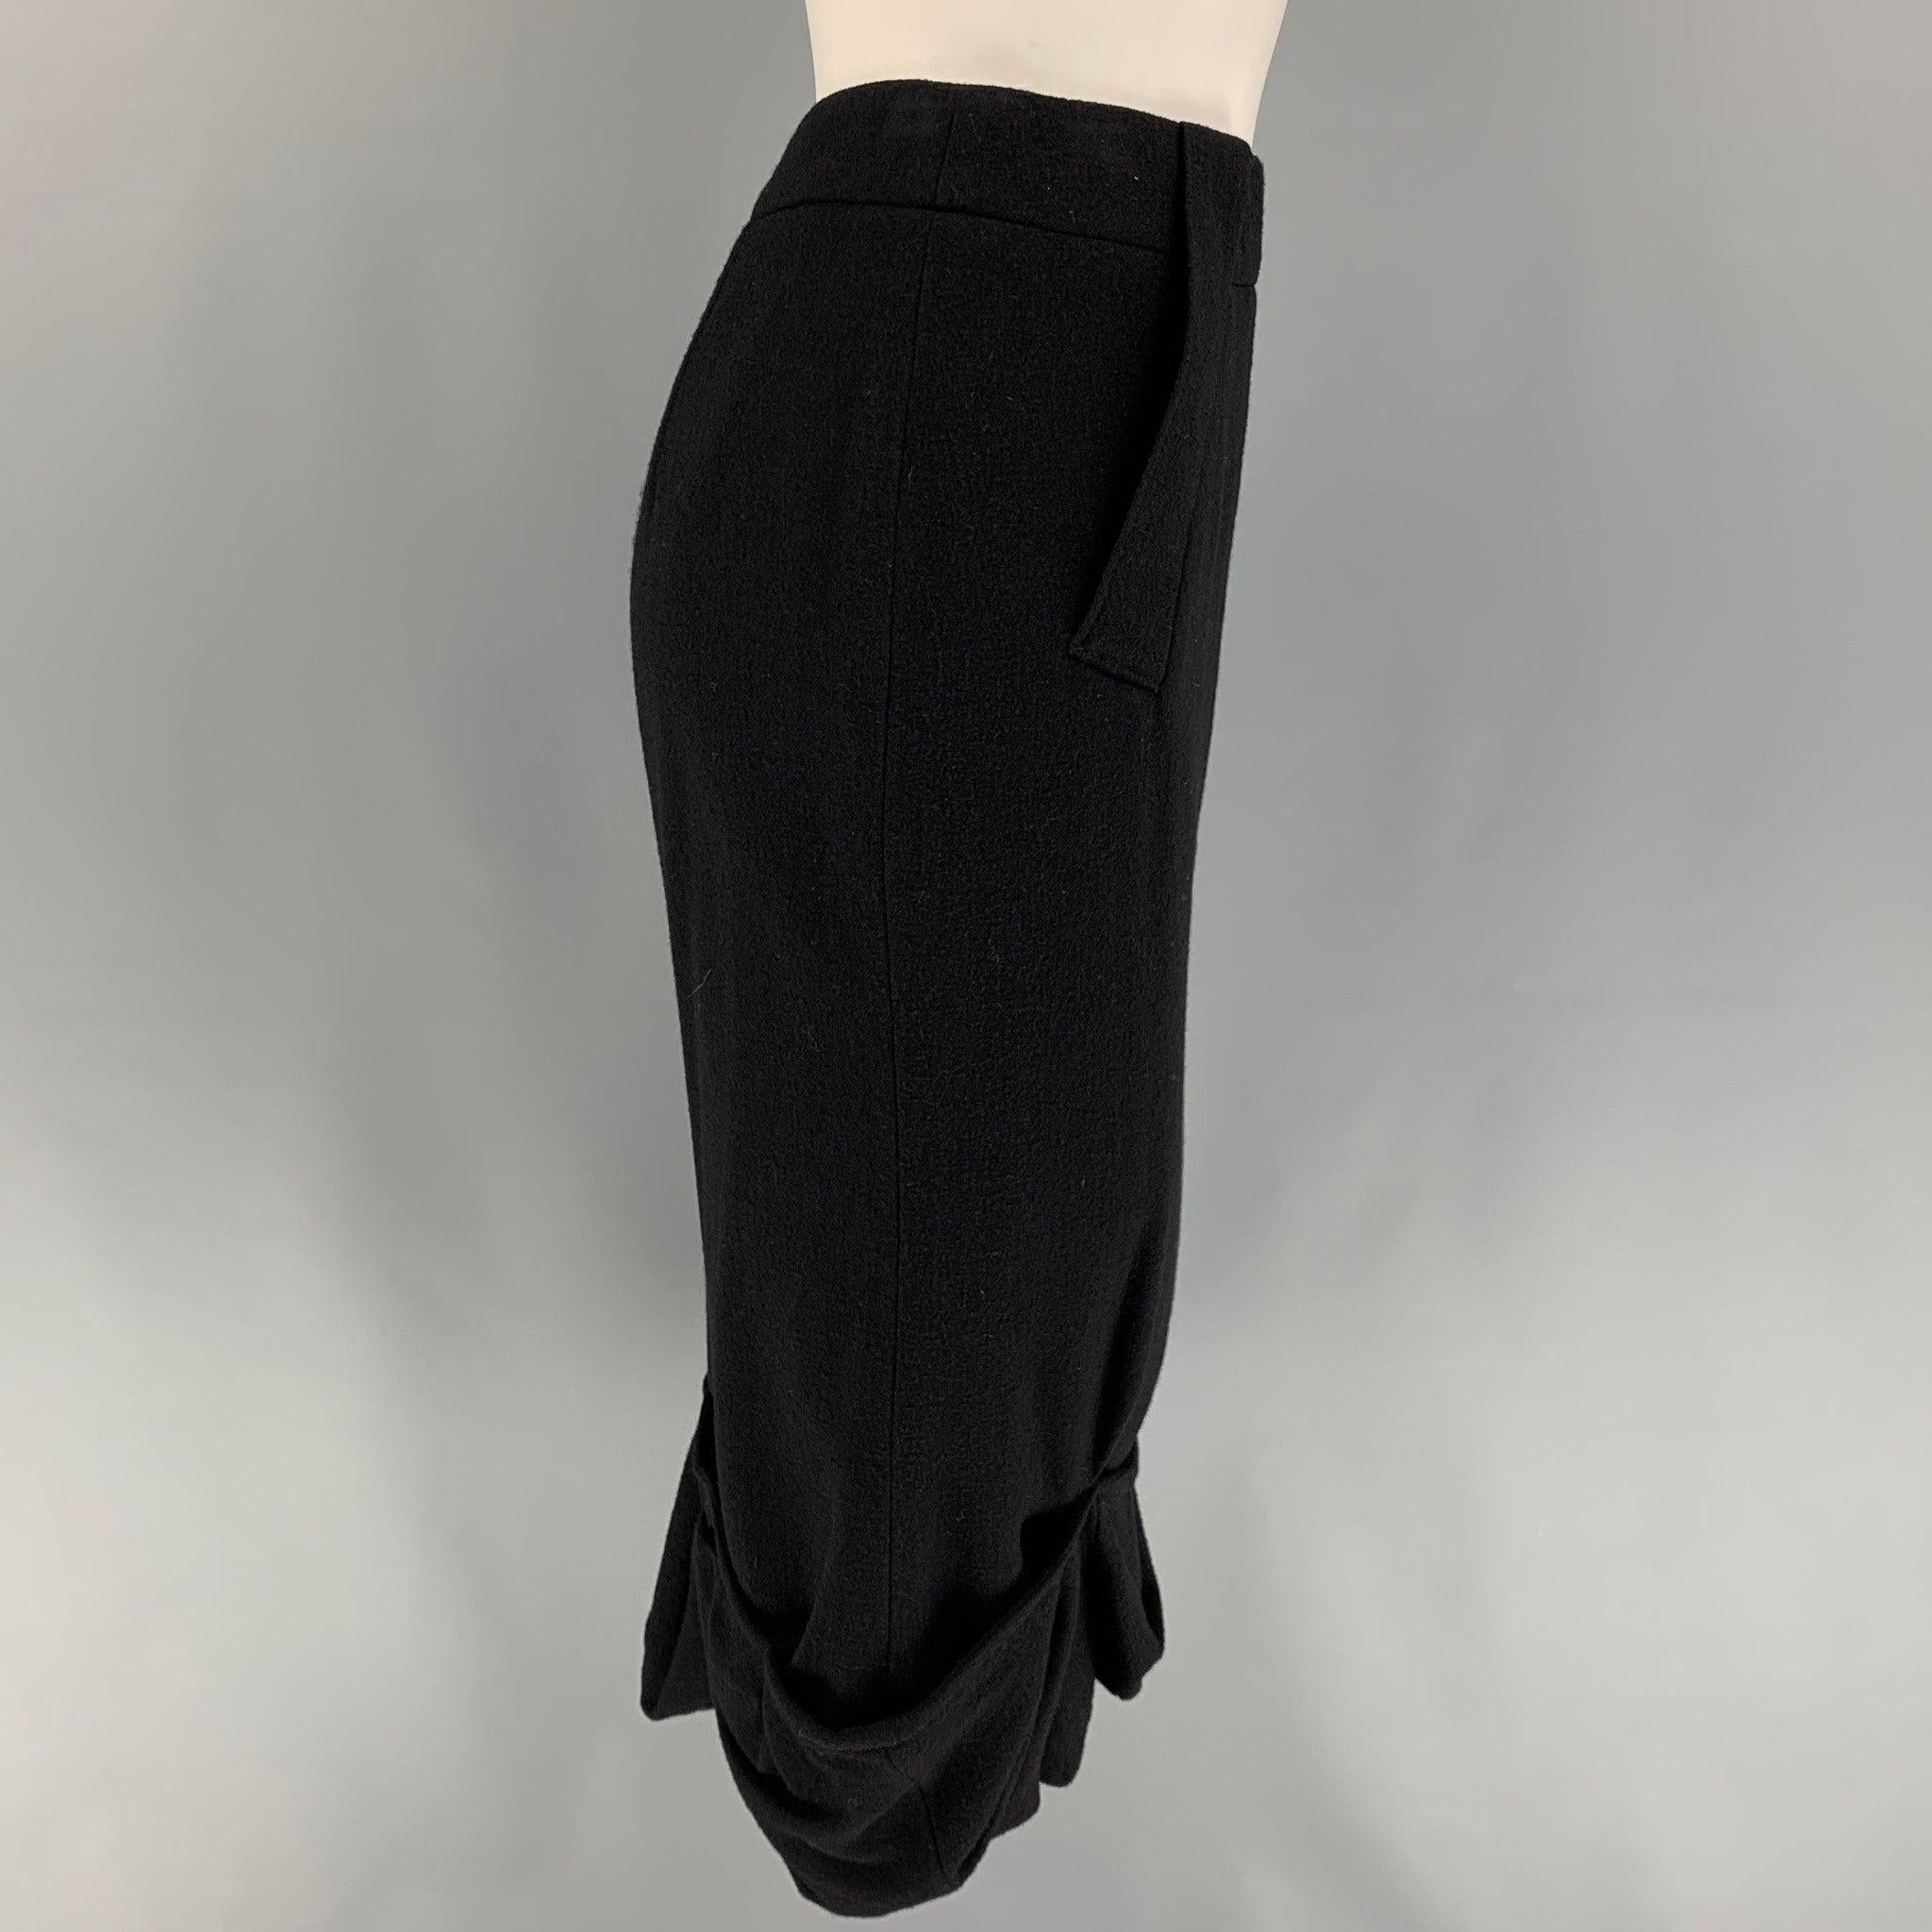 GIVENCHY skirt comes in a black wool featuring a ruffled hem, pencil style, and a back zip up closure. Made in Italy.
Very Good
Pre-Owned Condition. 

Marked:   36 

Measurements: 
  Waist: 27 inches  Hip: 32 inches  Length: 29 inches 
  
  
